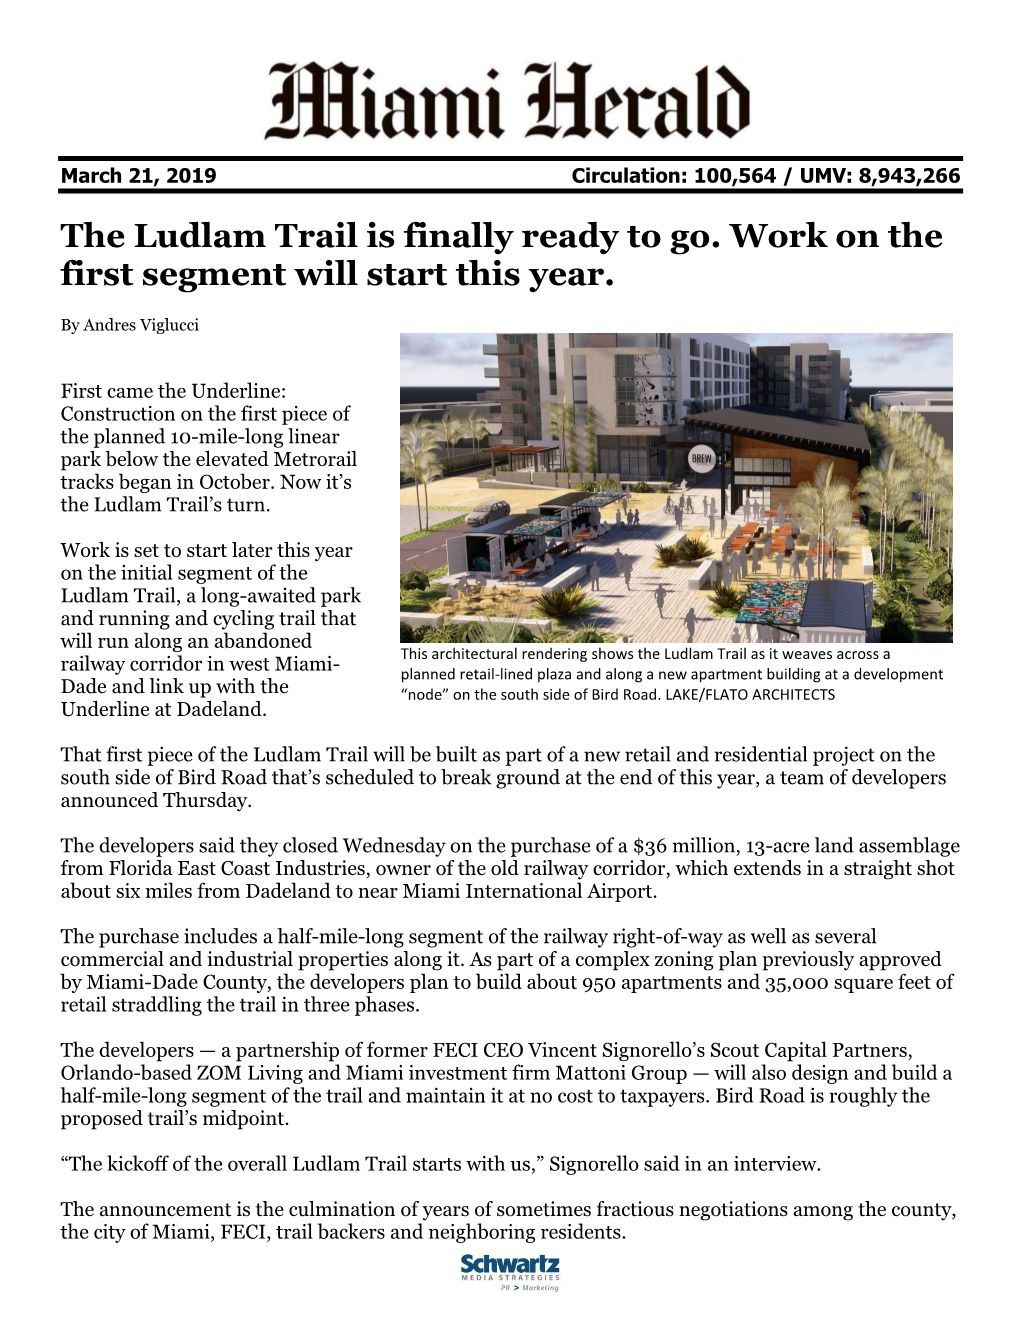 The Ludlam Trail Is Finally Ready to Go. Work on the First Segment Will Start This Year